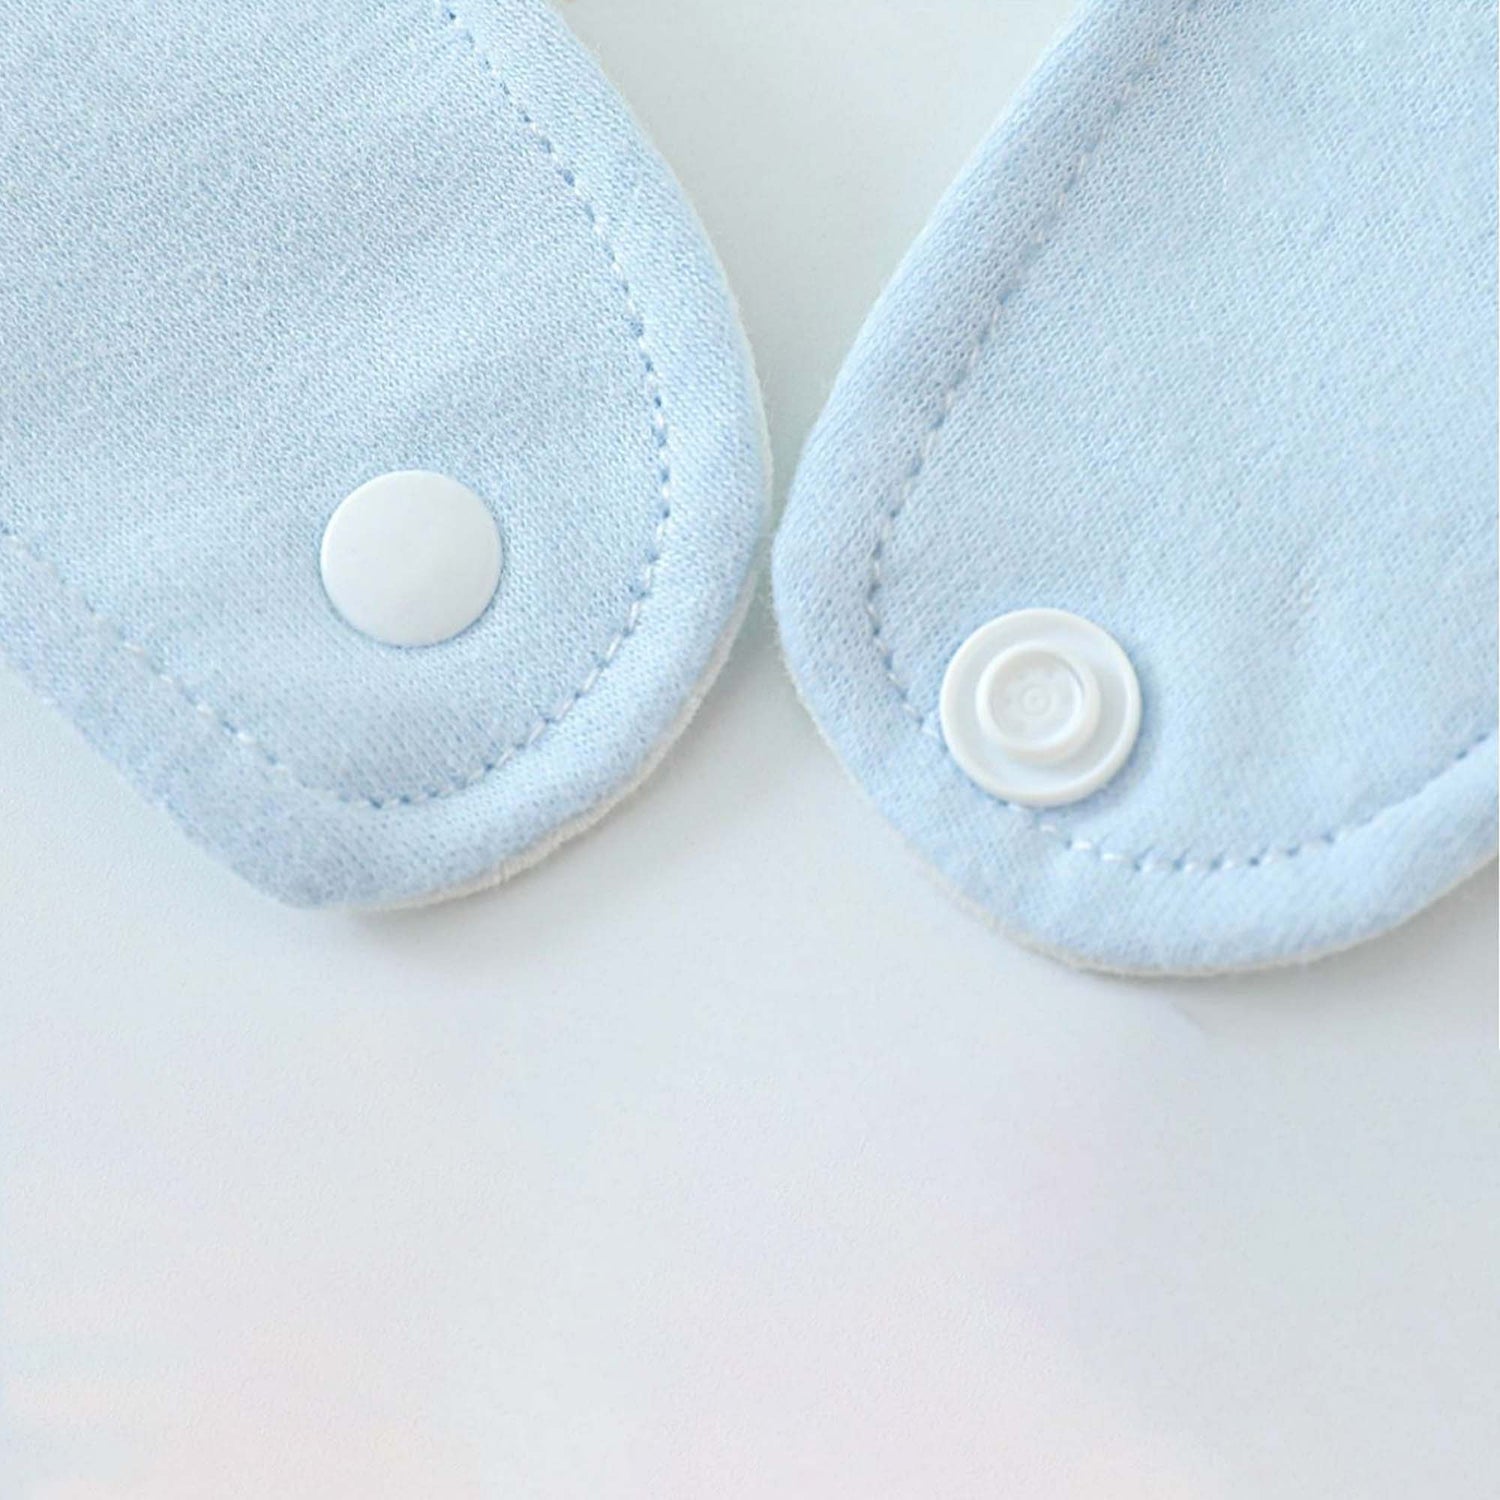 A close up of the blue cotton baby bib button